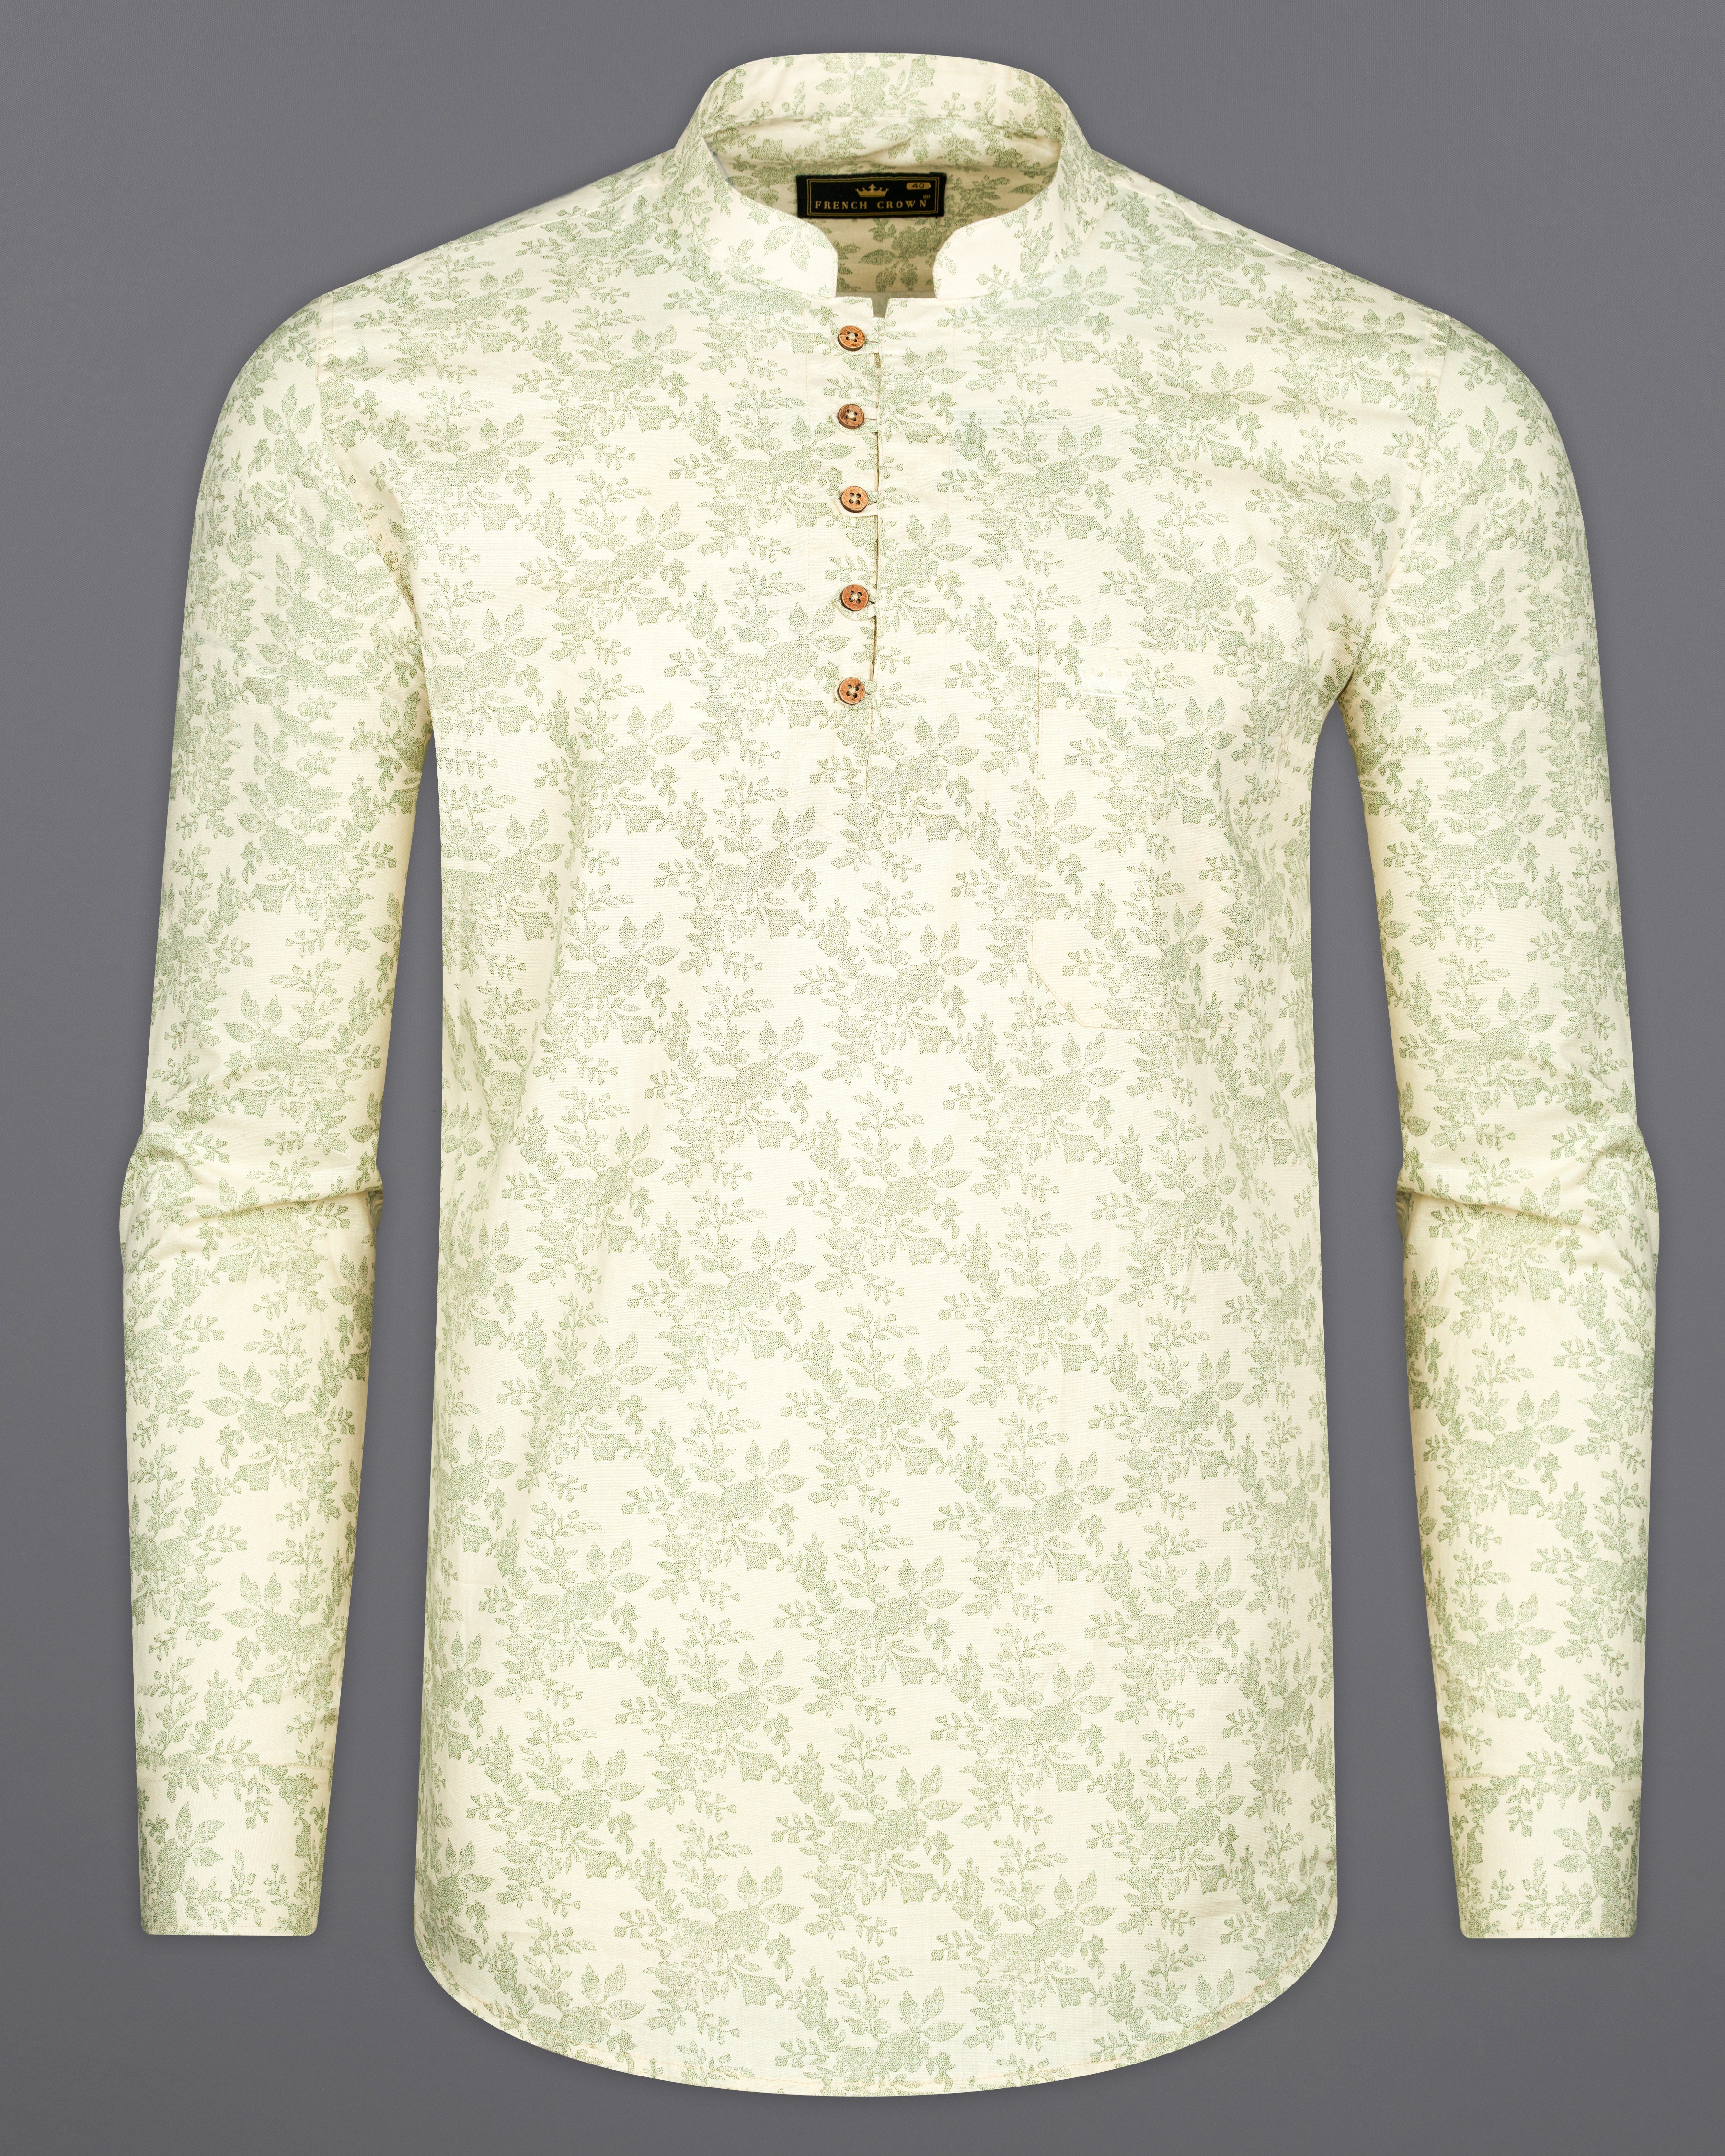 Beige with Moss Green Ditsy Printed Luxurious Linen Kurta Shirt 9930-KS-38, 9930-KS-H-38, 9930-KS-39, 9930-KS-H-39, 9930-KS-40, 9930-KS-H-40, 9930-KS-42, 9930-KS-H-42, 9930-KS-44, 9930-KS-H-44, 9930-KS-46, 9930-KS-H-46, 9930-KS-48, 9930-KS-H-48, 9930-KS-50, 9930-KS-H-50, 9930-KS-52, 9930-KS-H-52